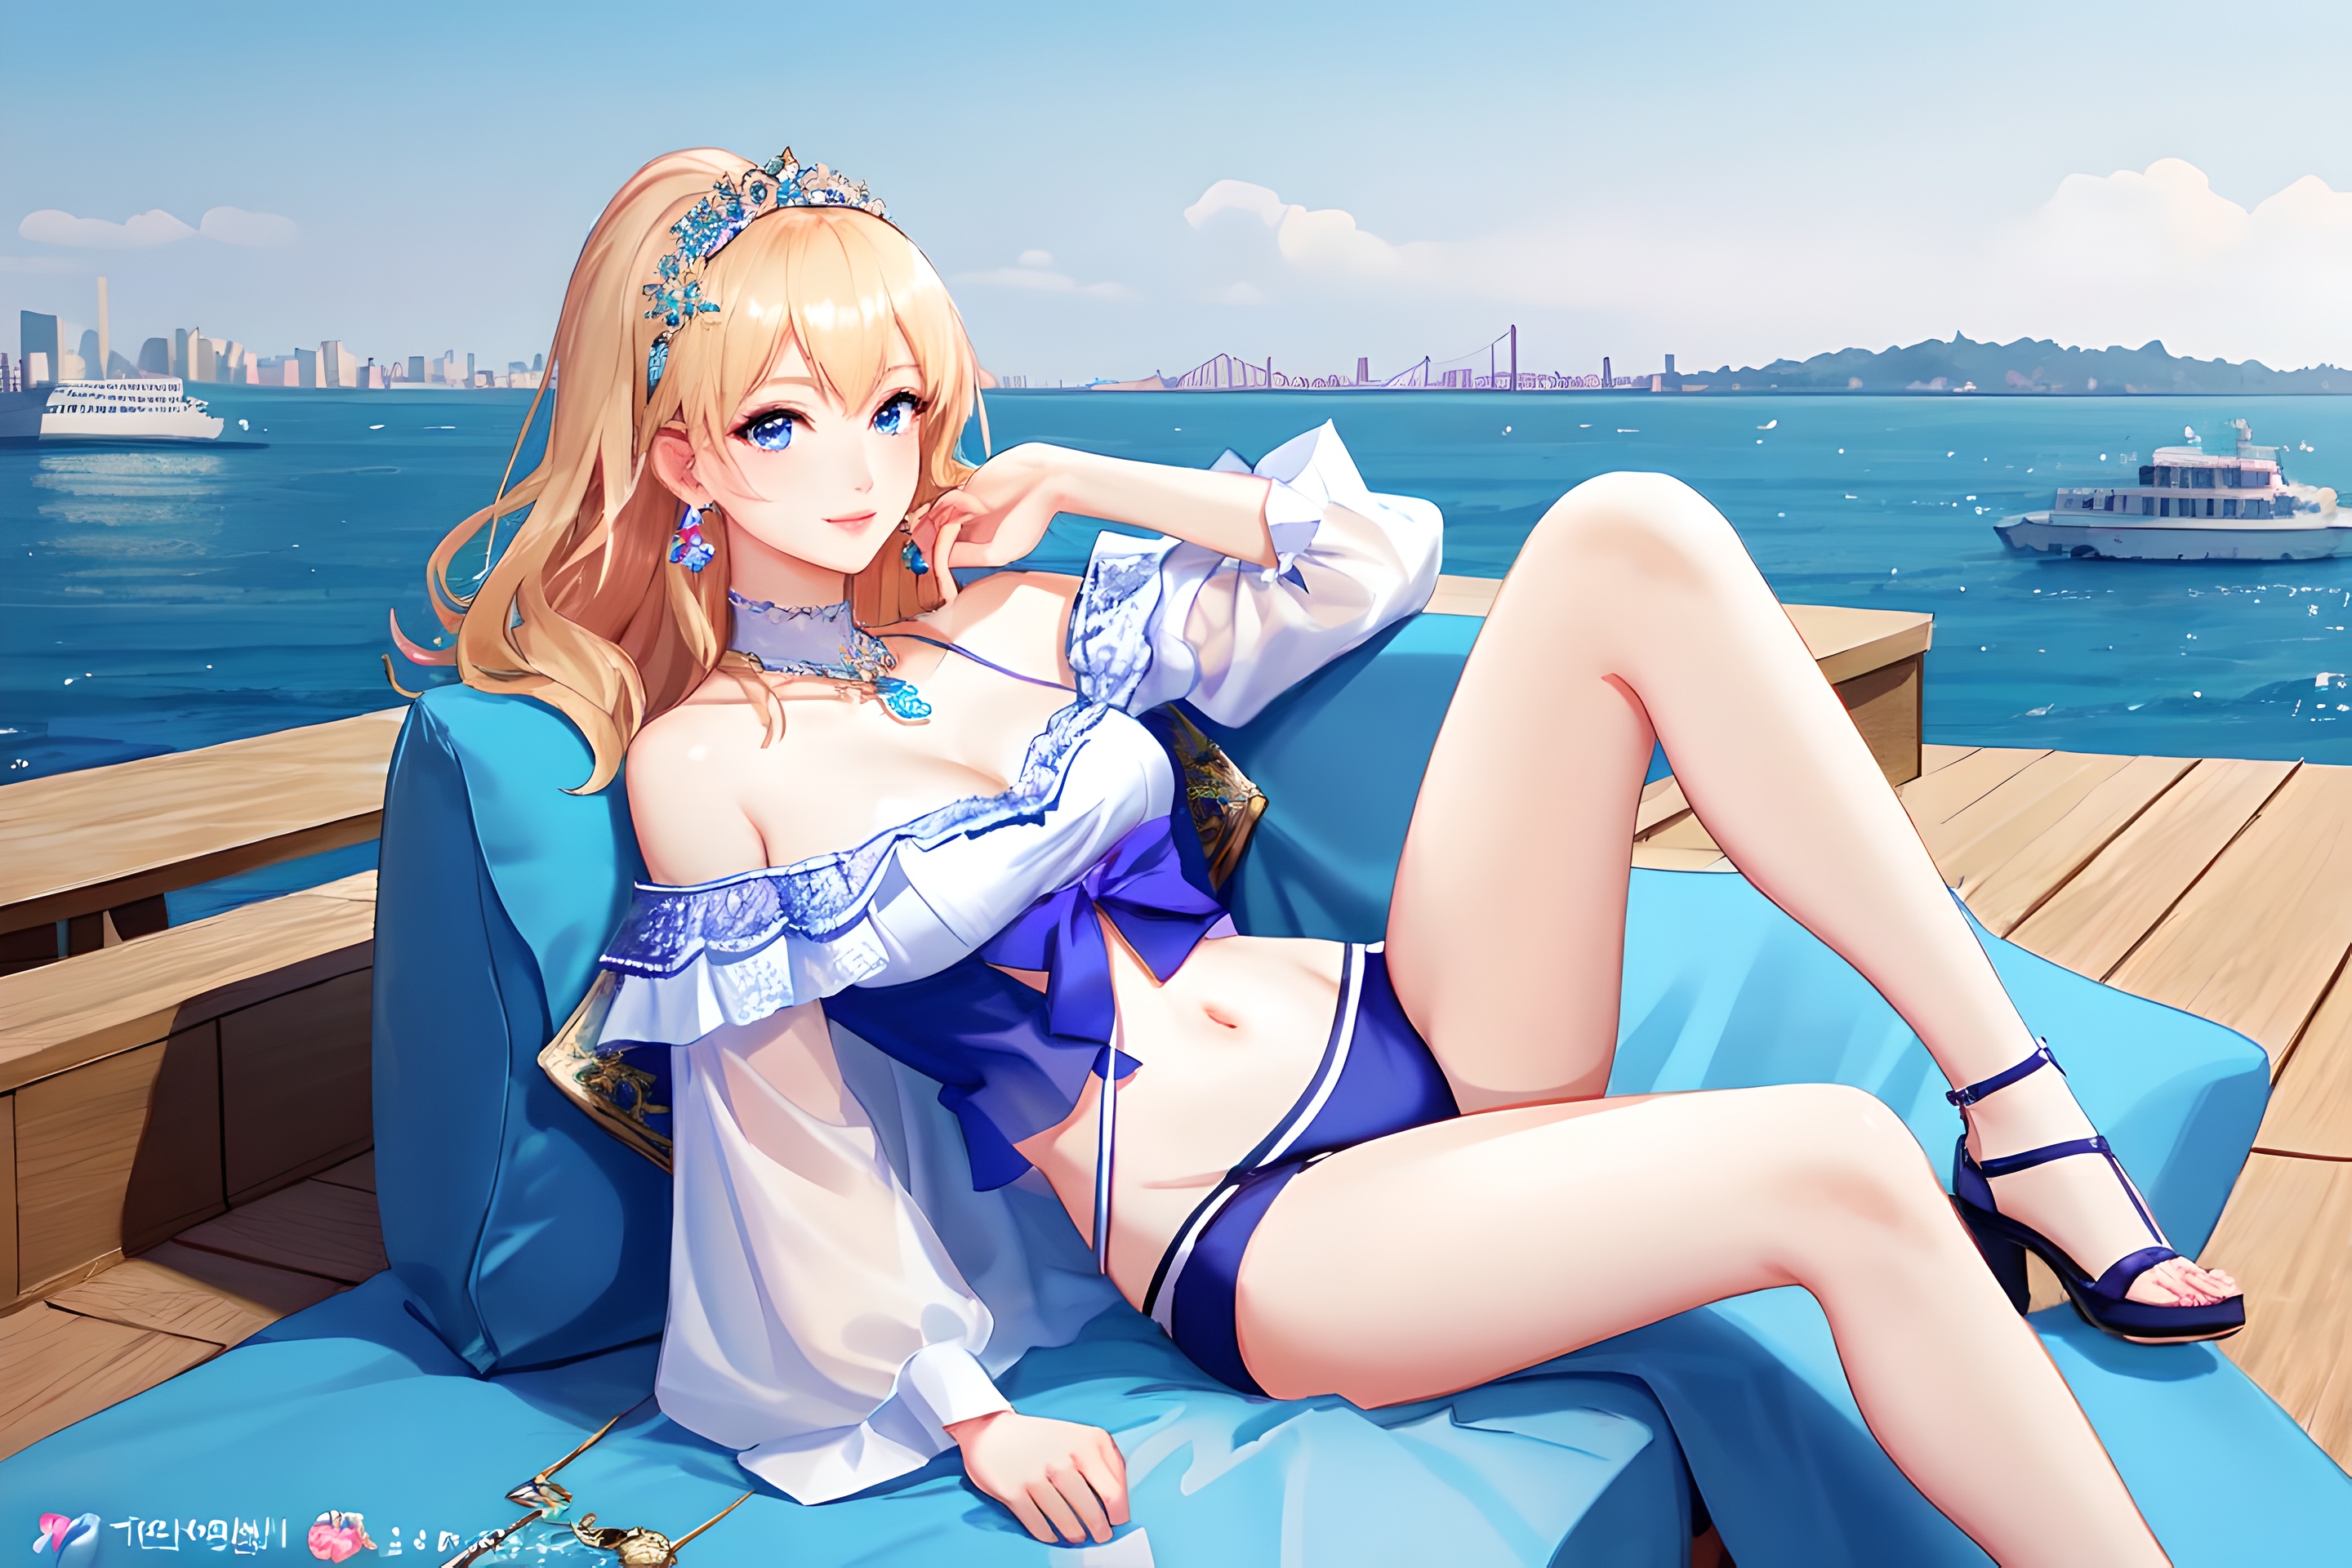 Anime 2880x1920 blonde character design  AI art Naoko Takeuchi style manga anime girls water looking at viewer long hair thighs legs belly belly button boat clouds sky heels earring smiling bikini bottoms